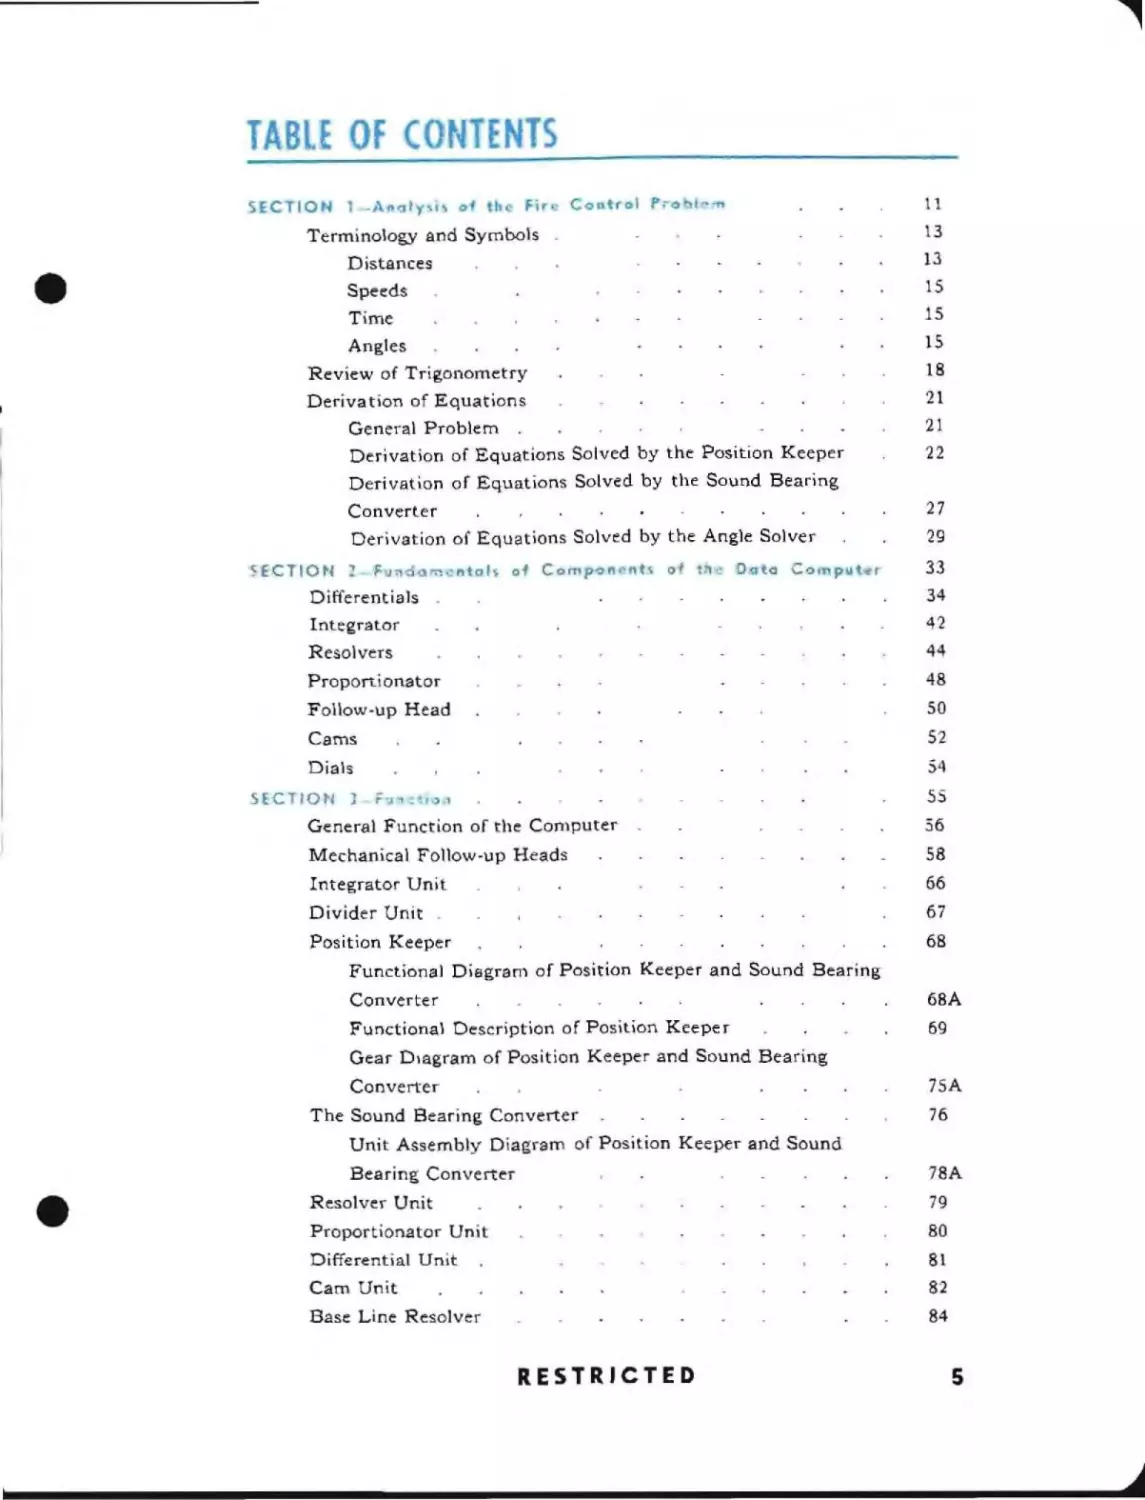 Page 5, Table of Contents